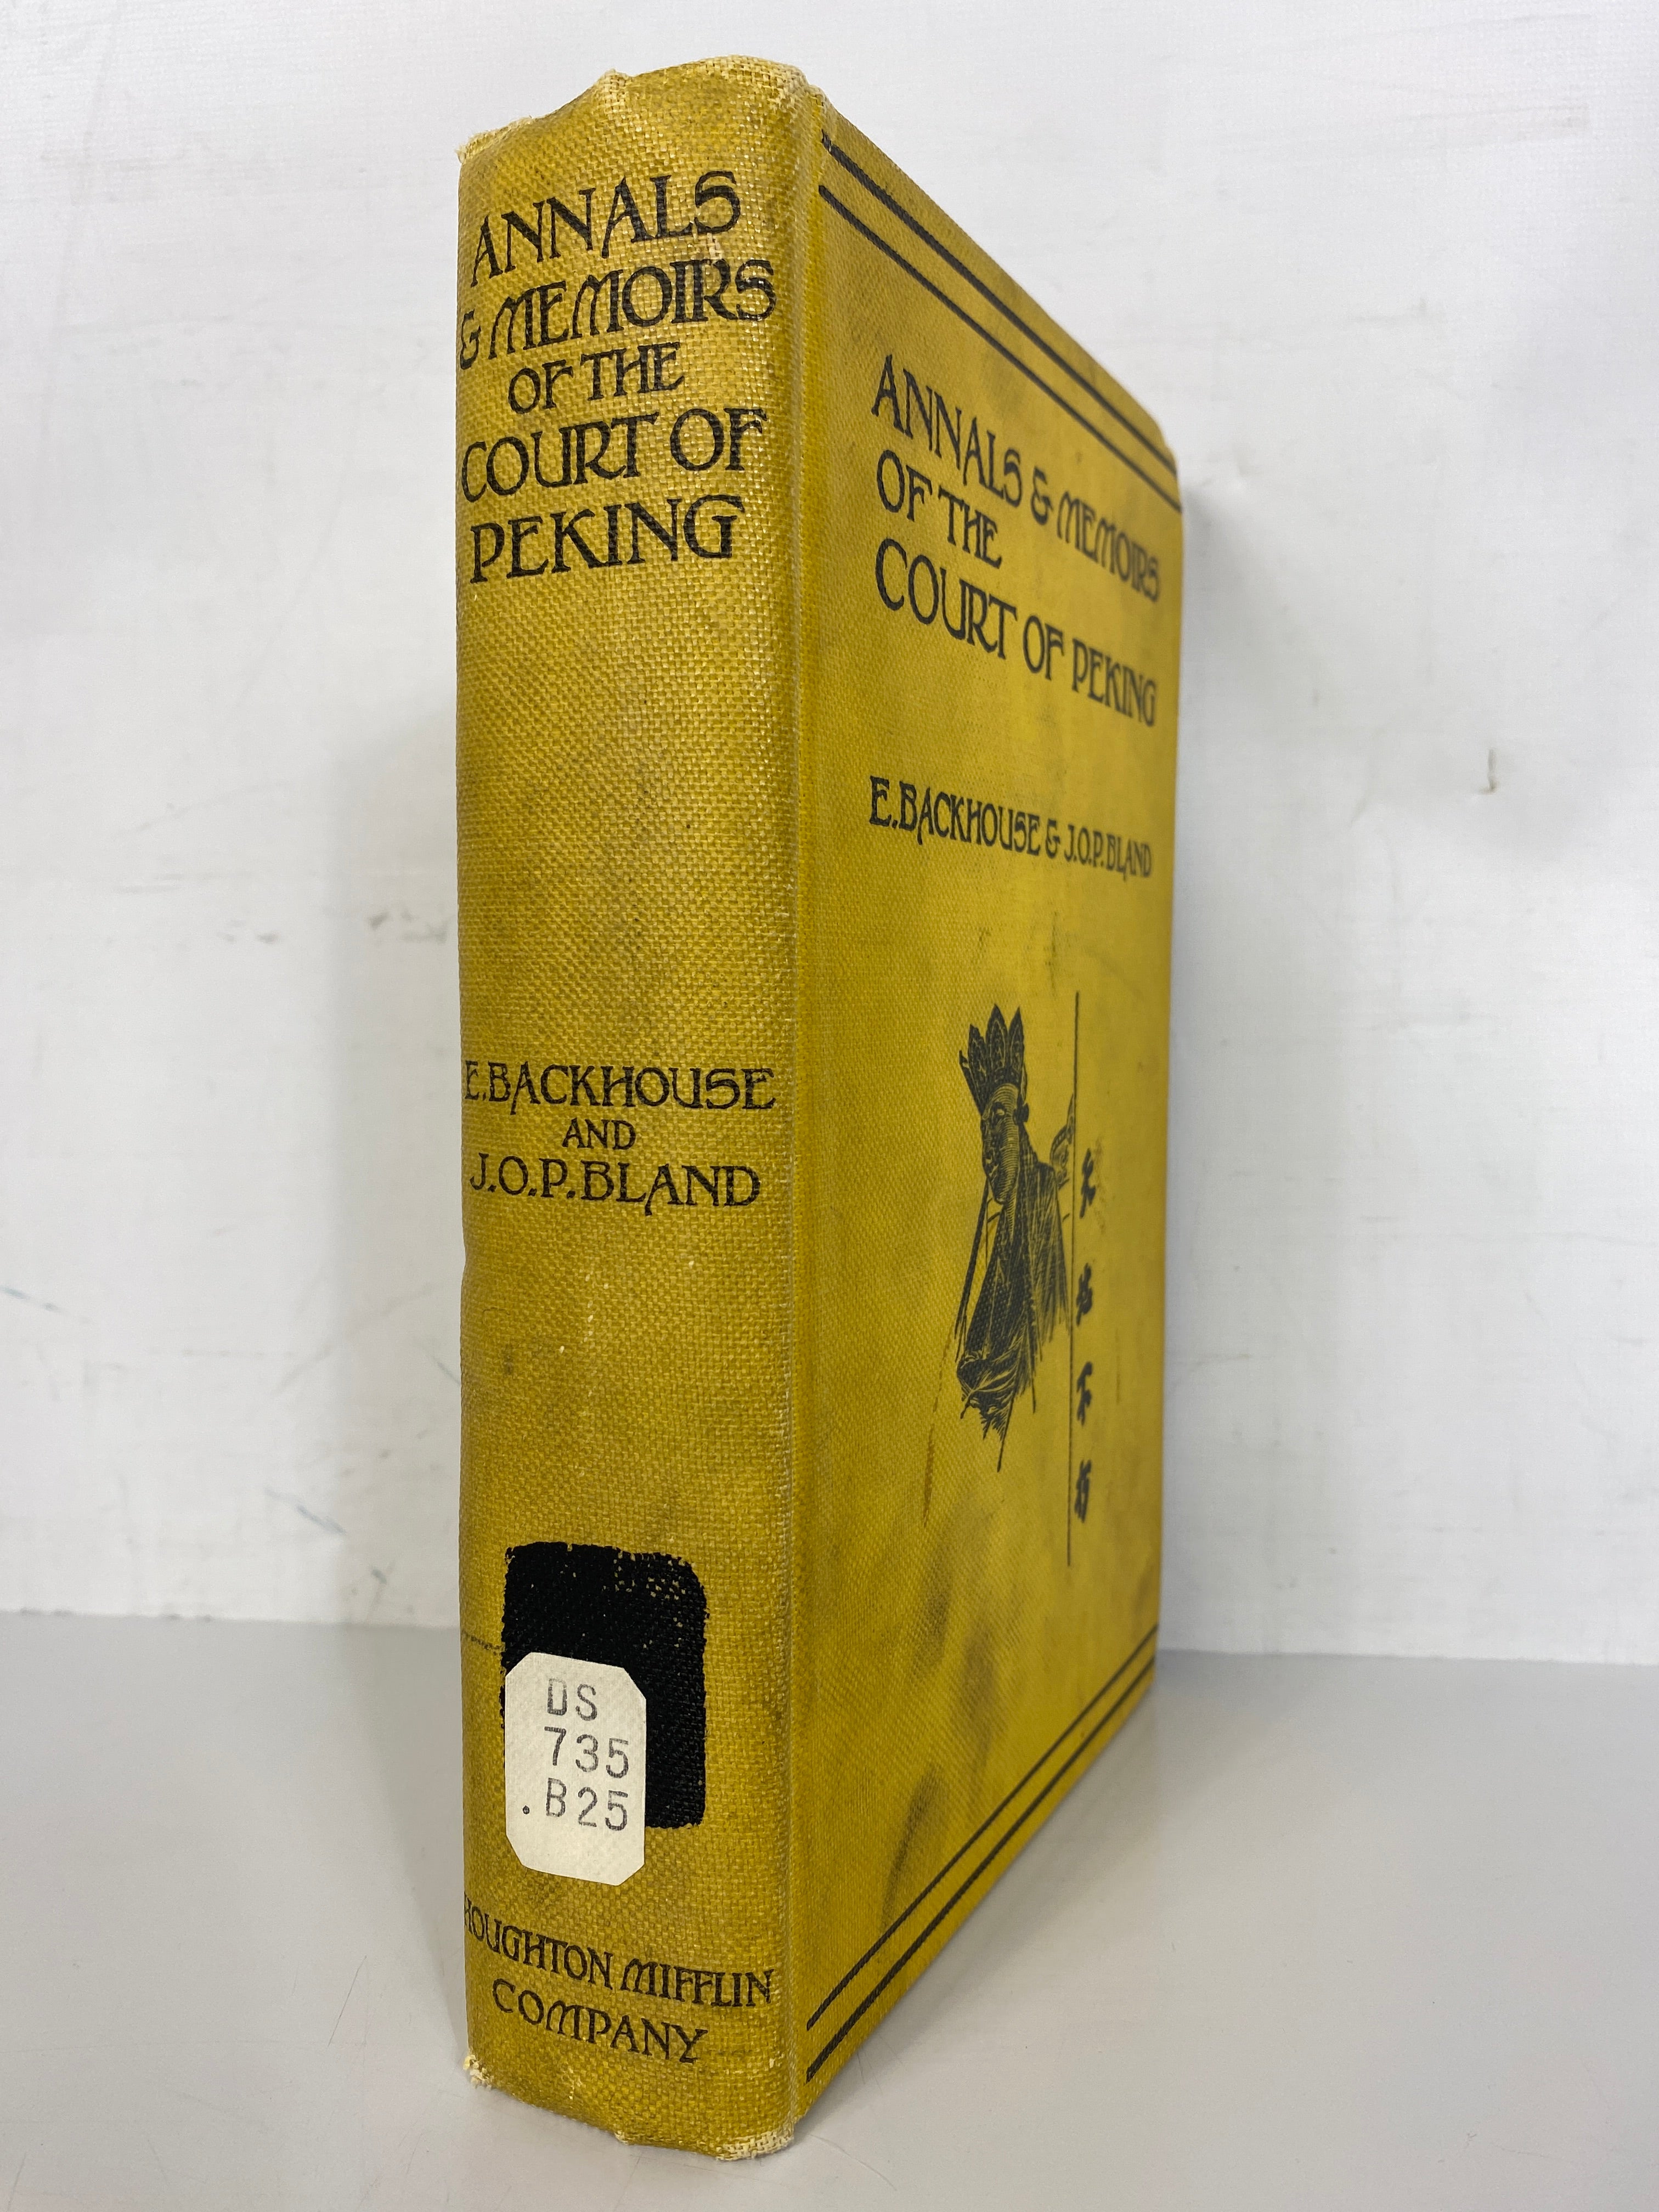 Annals & Memoirs of the Court of Peking by Backhouse and Bland 1914 Illus. HC